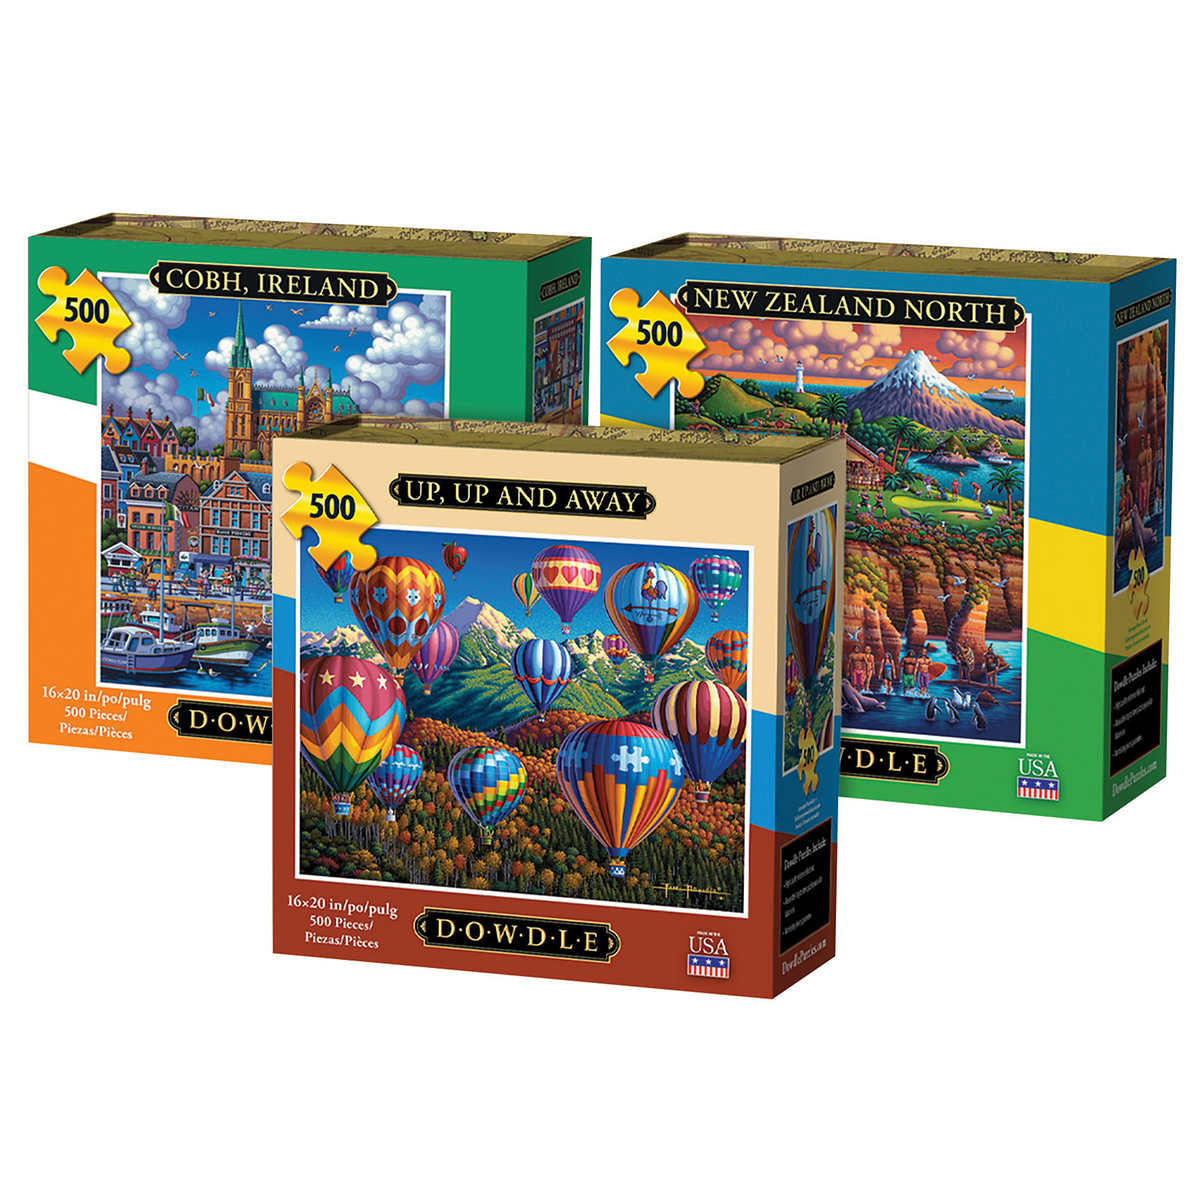 Pouch Included Landscape Painting 500 Piece Jigsaw Puzzle